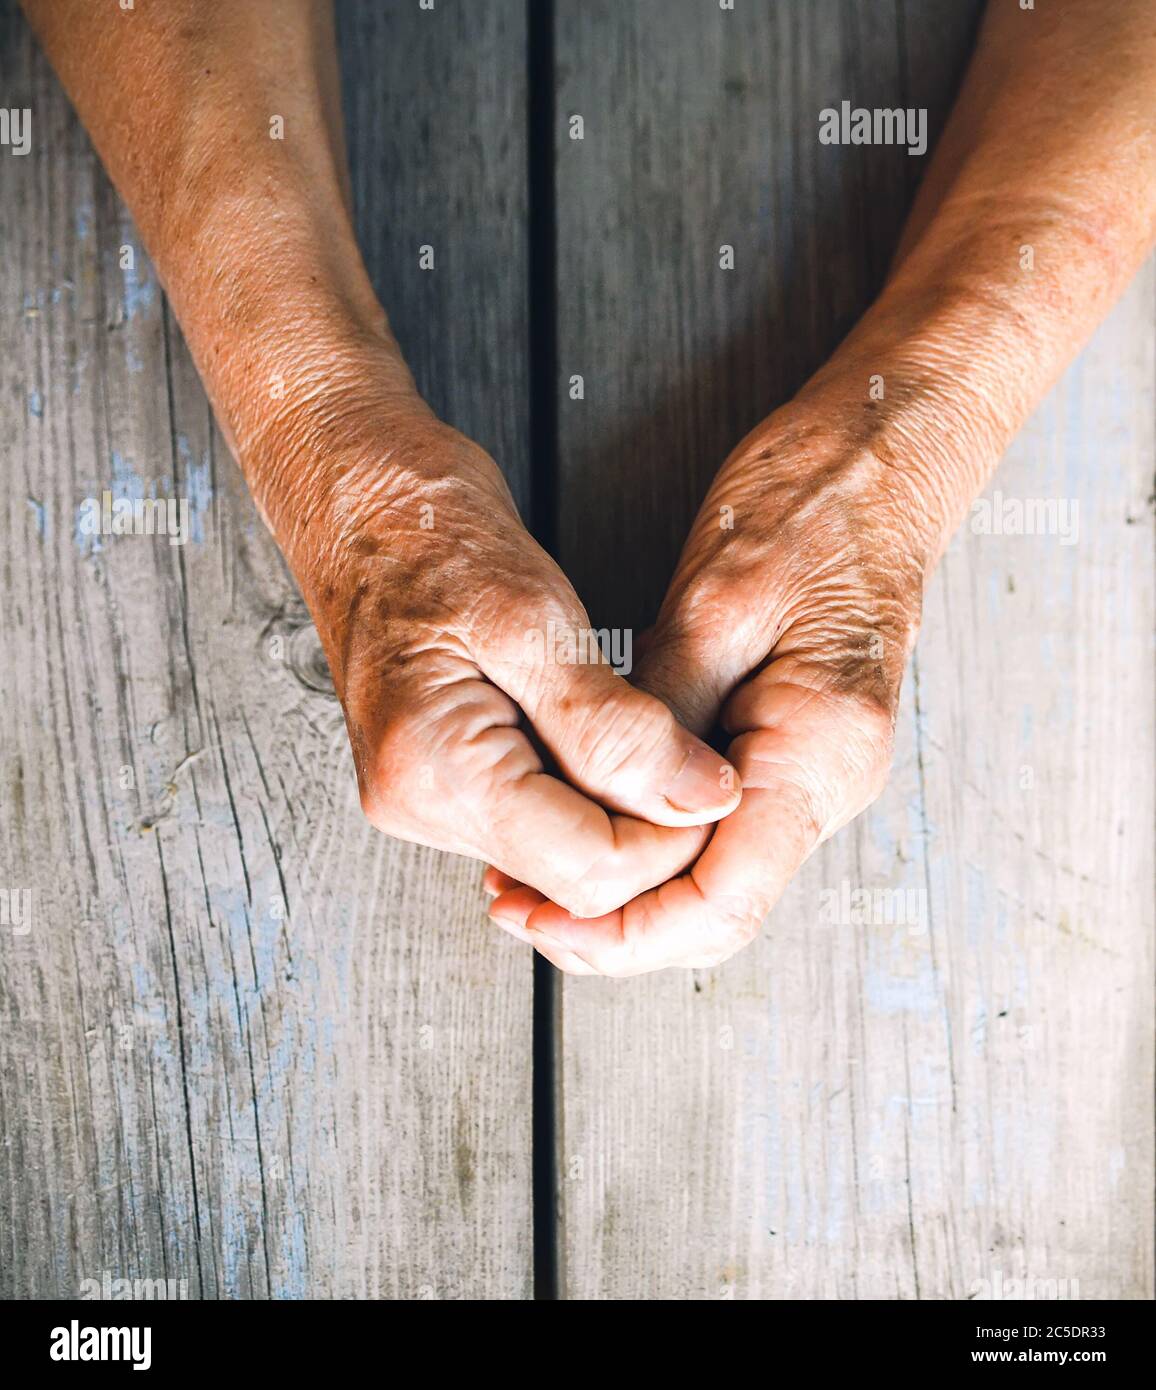 Elderly woman hands on rustic wooden background. Senior woman with fingers crossed. Wrinkled palms stretched forward. Religion, take care, mothers day Stock Photo